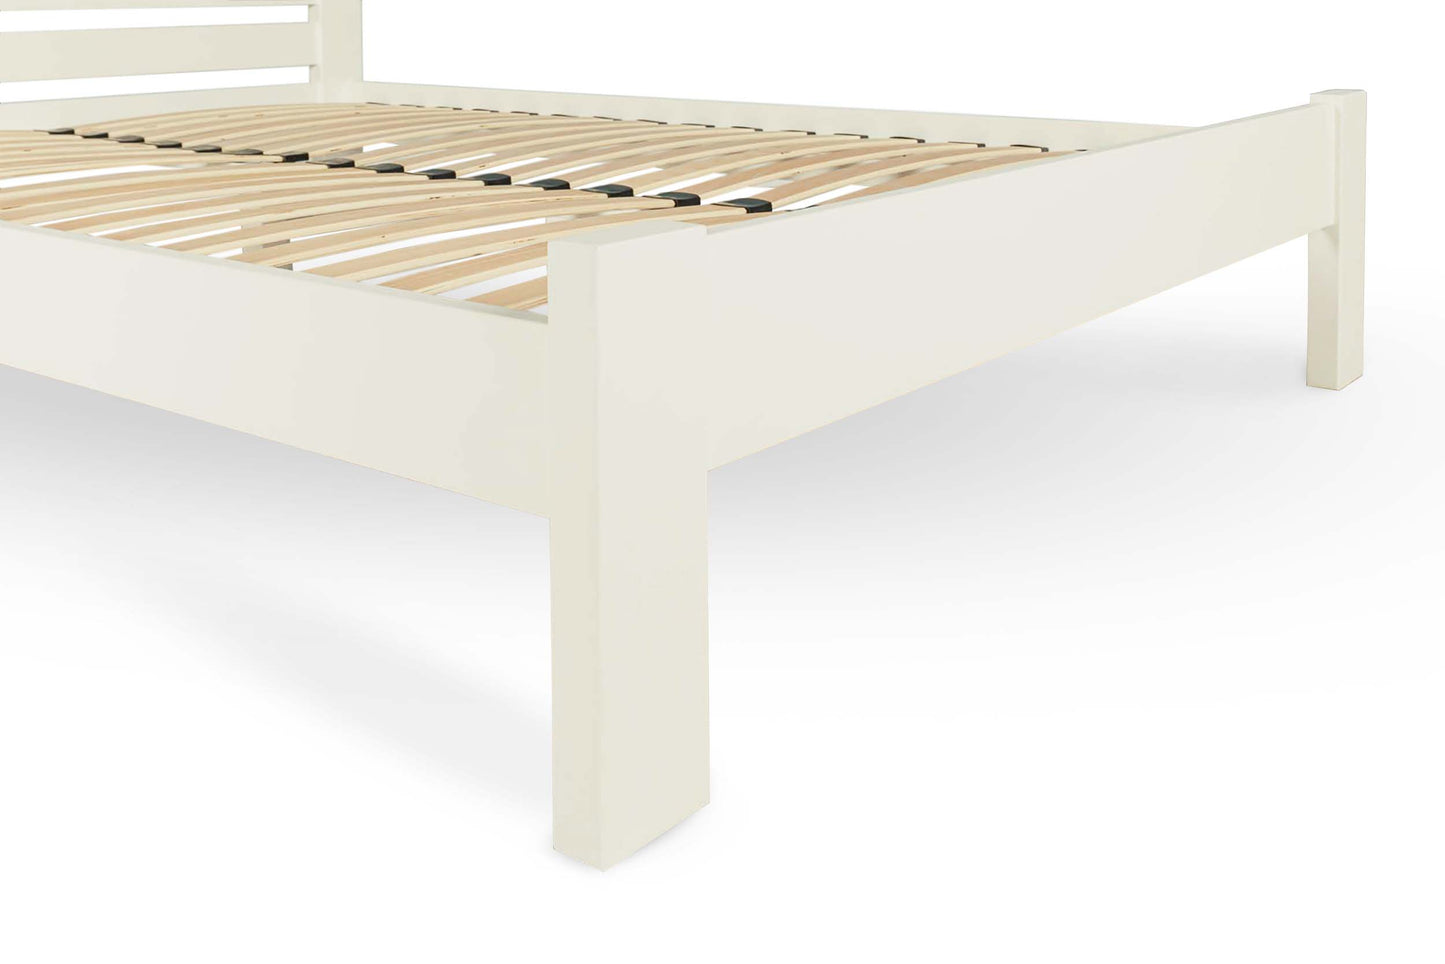 Wingfield Bed Frame - 5ft King Size - Soft White